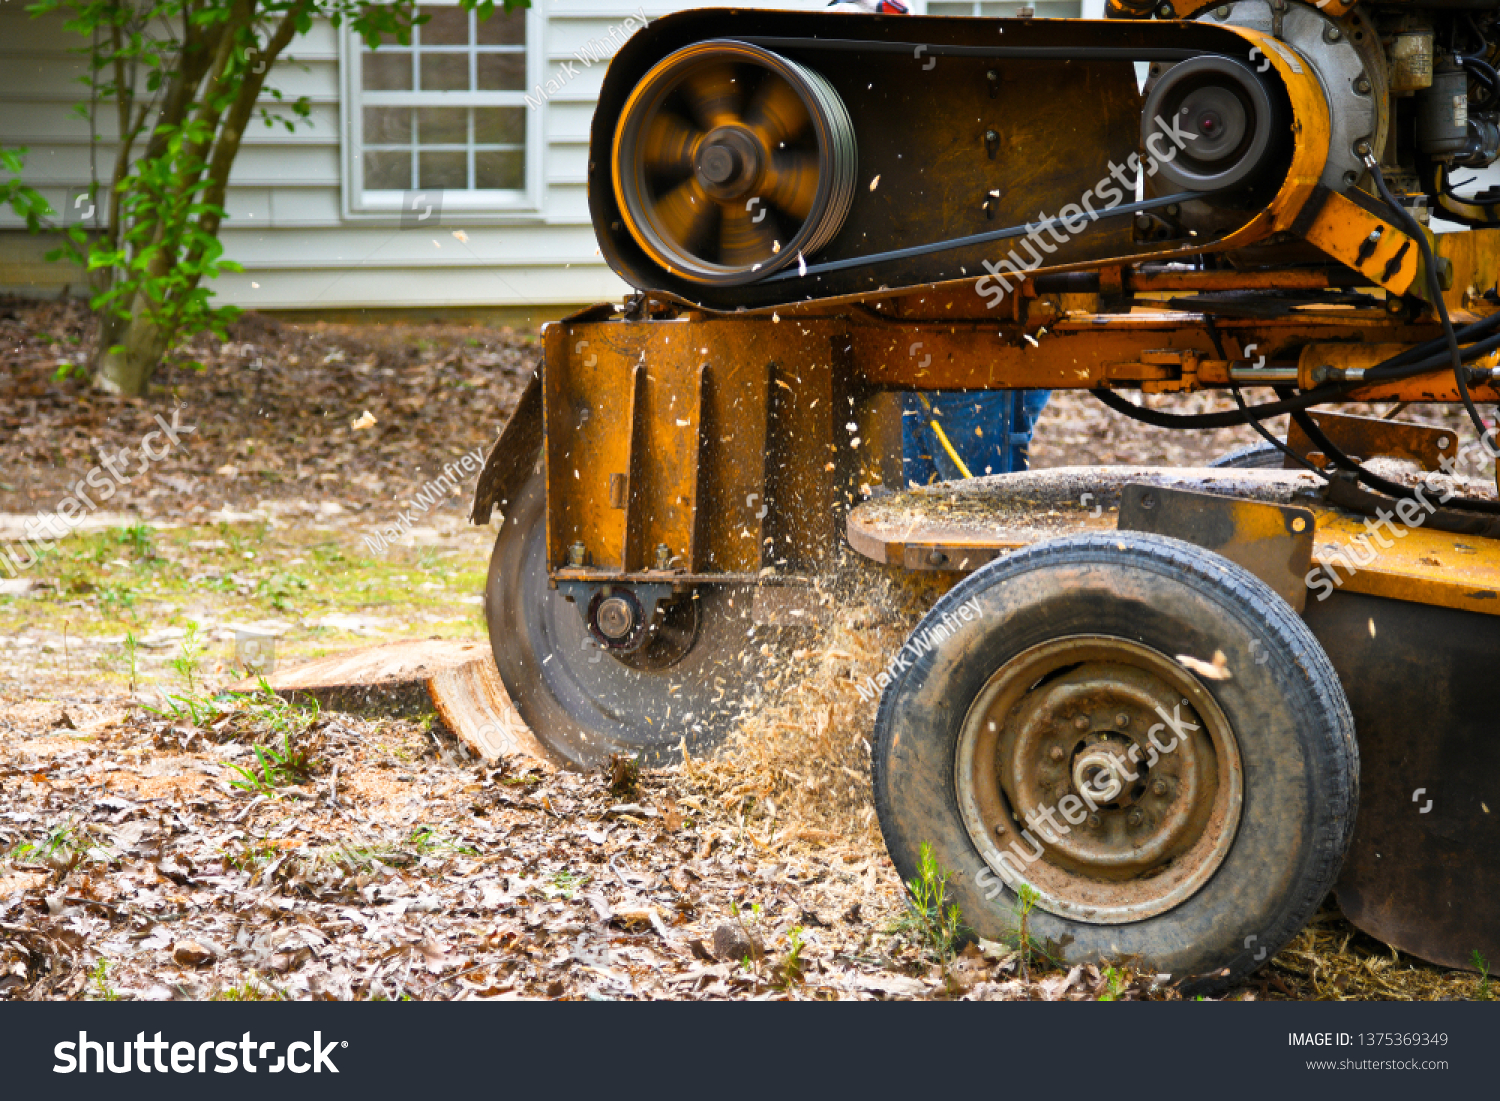 A Stump Grinding  Machine Removing a Stump from Cut Down Tree #1375369349